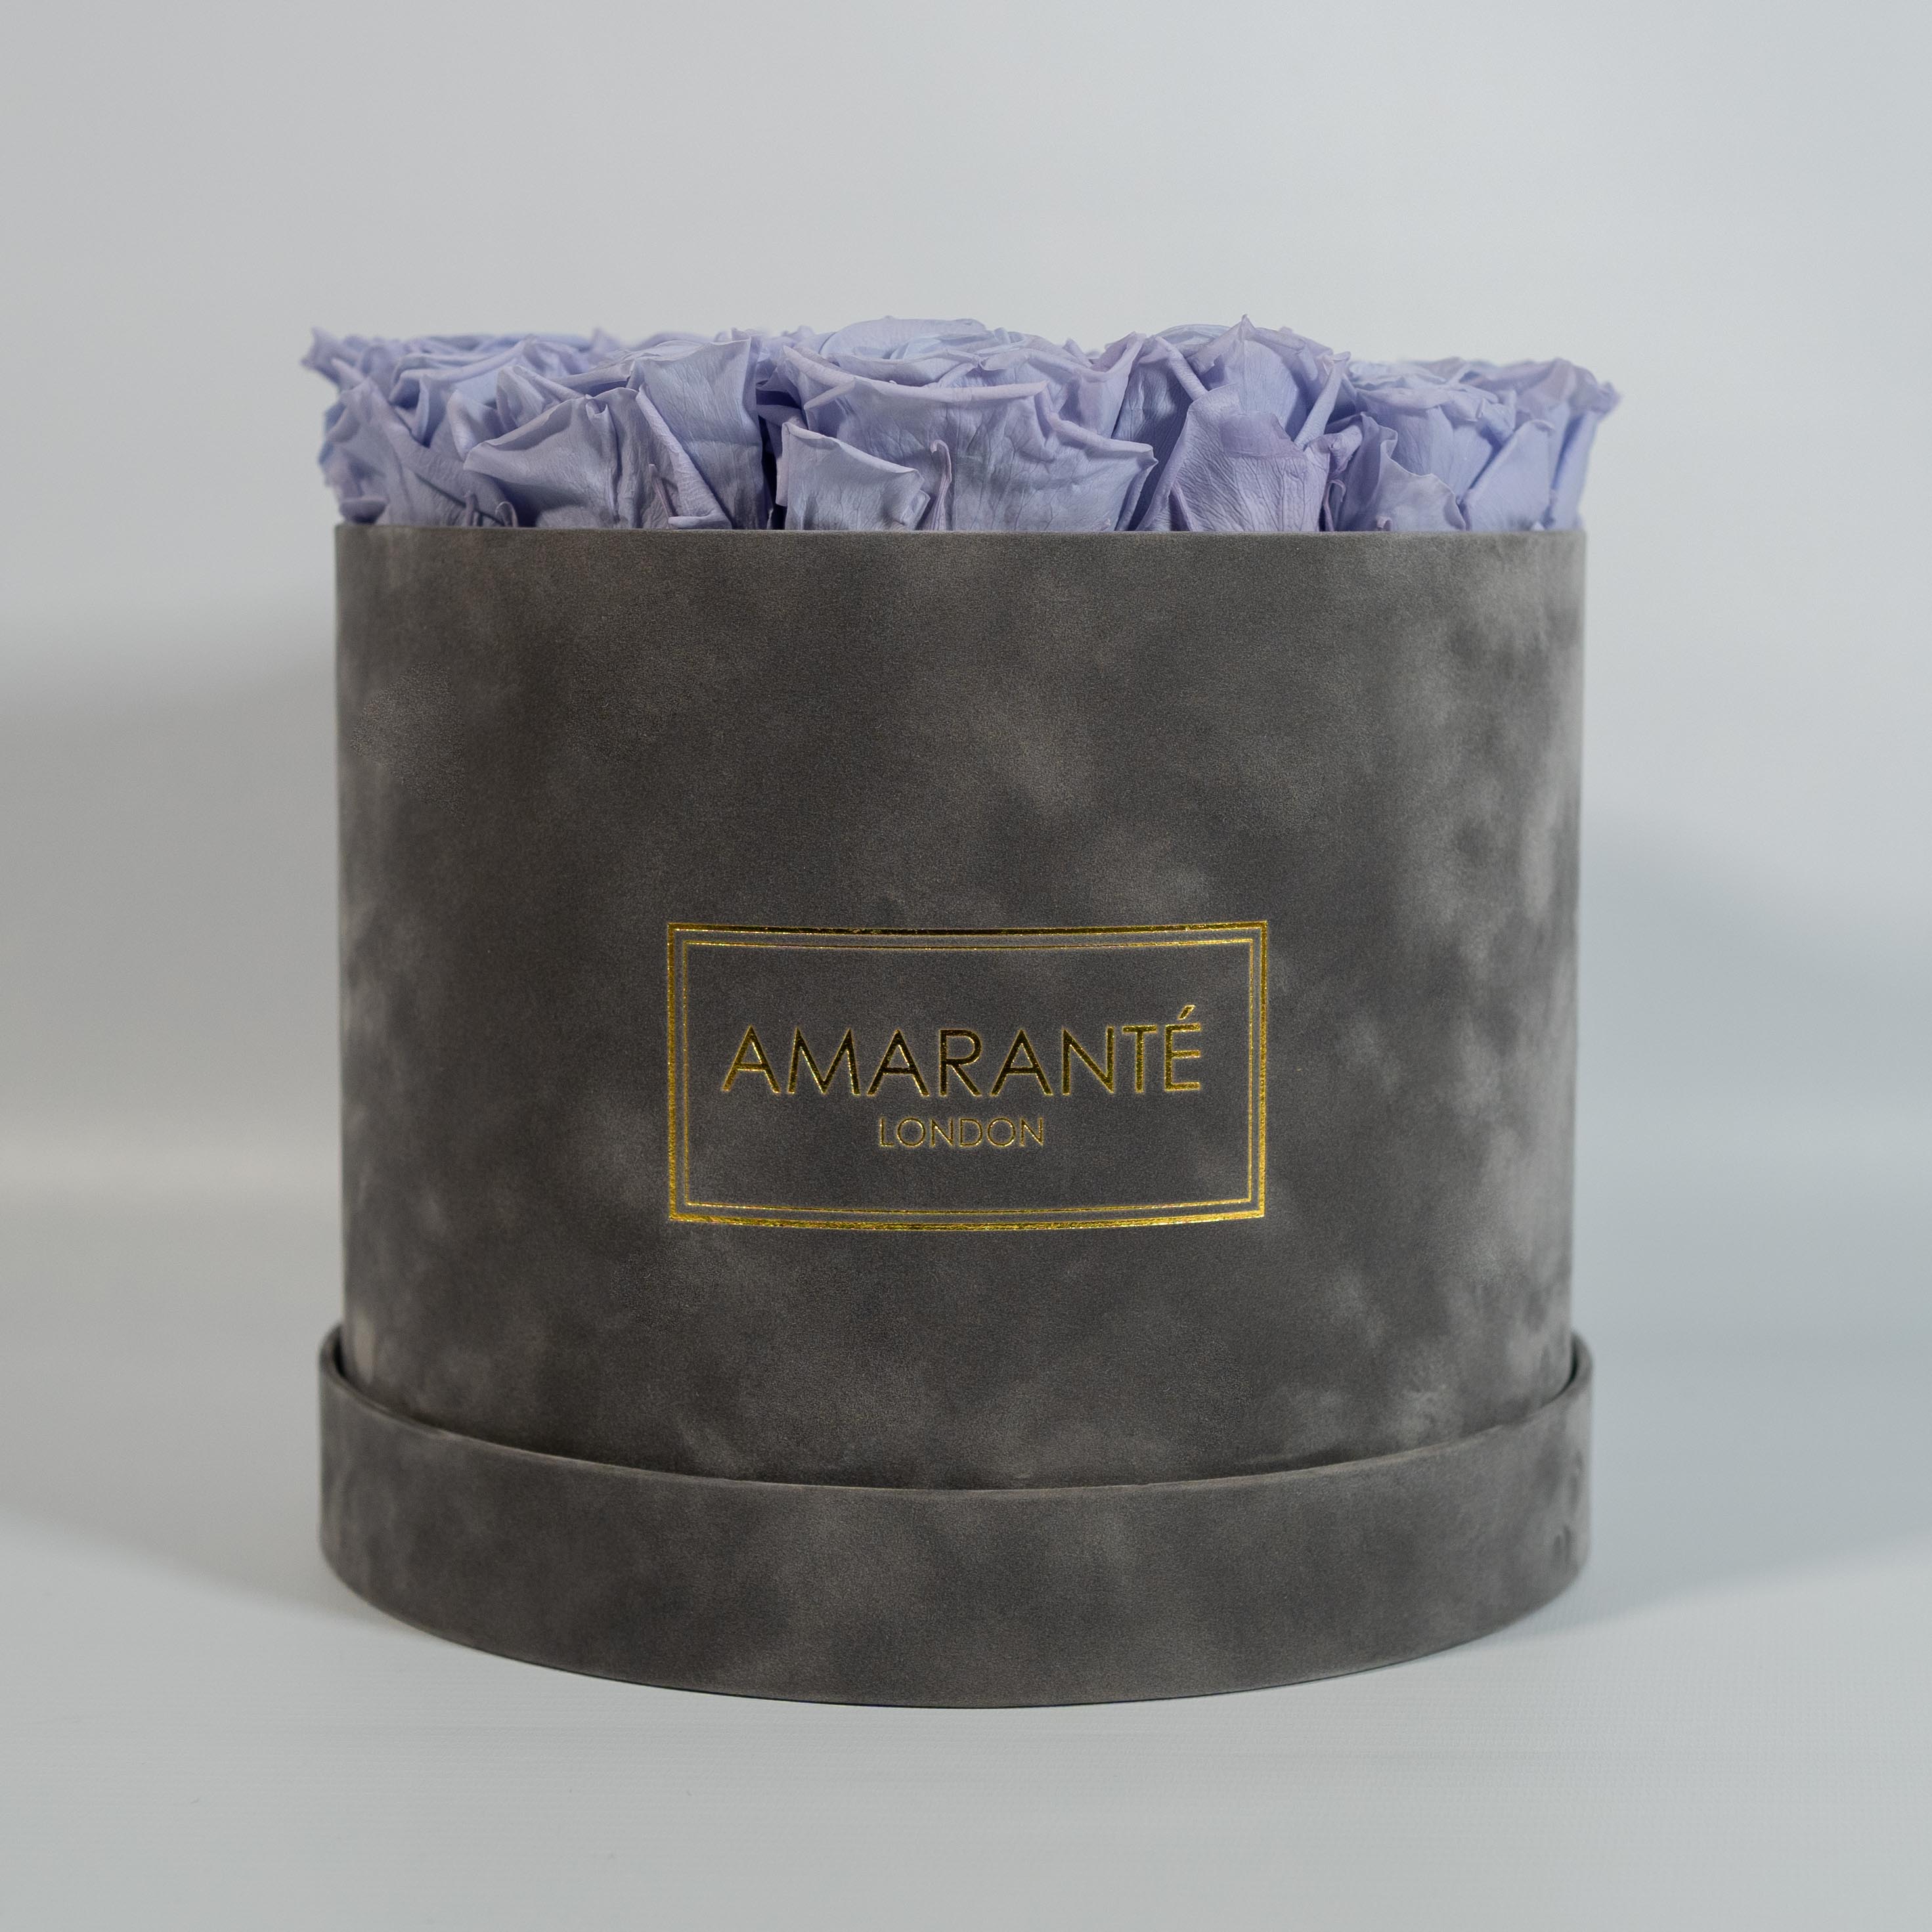 Fragrant lavender Roses encompassed in a modern grey box in round and large size 